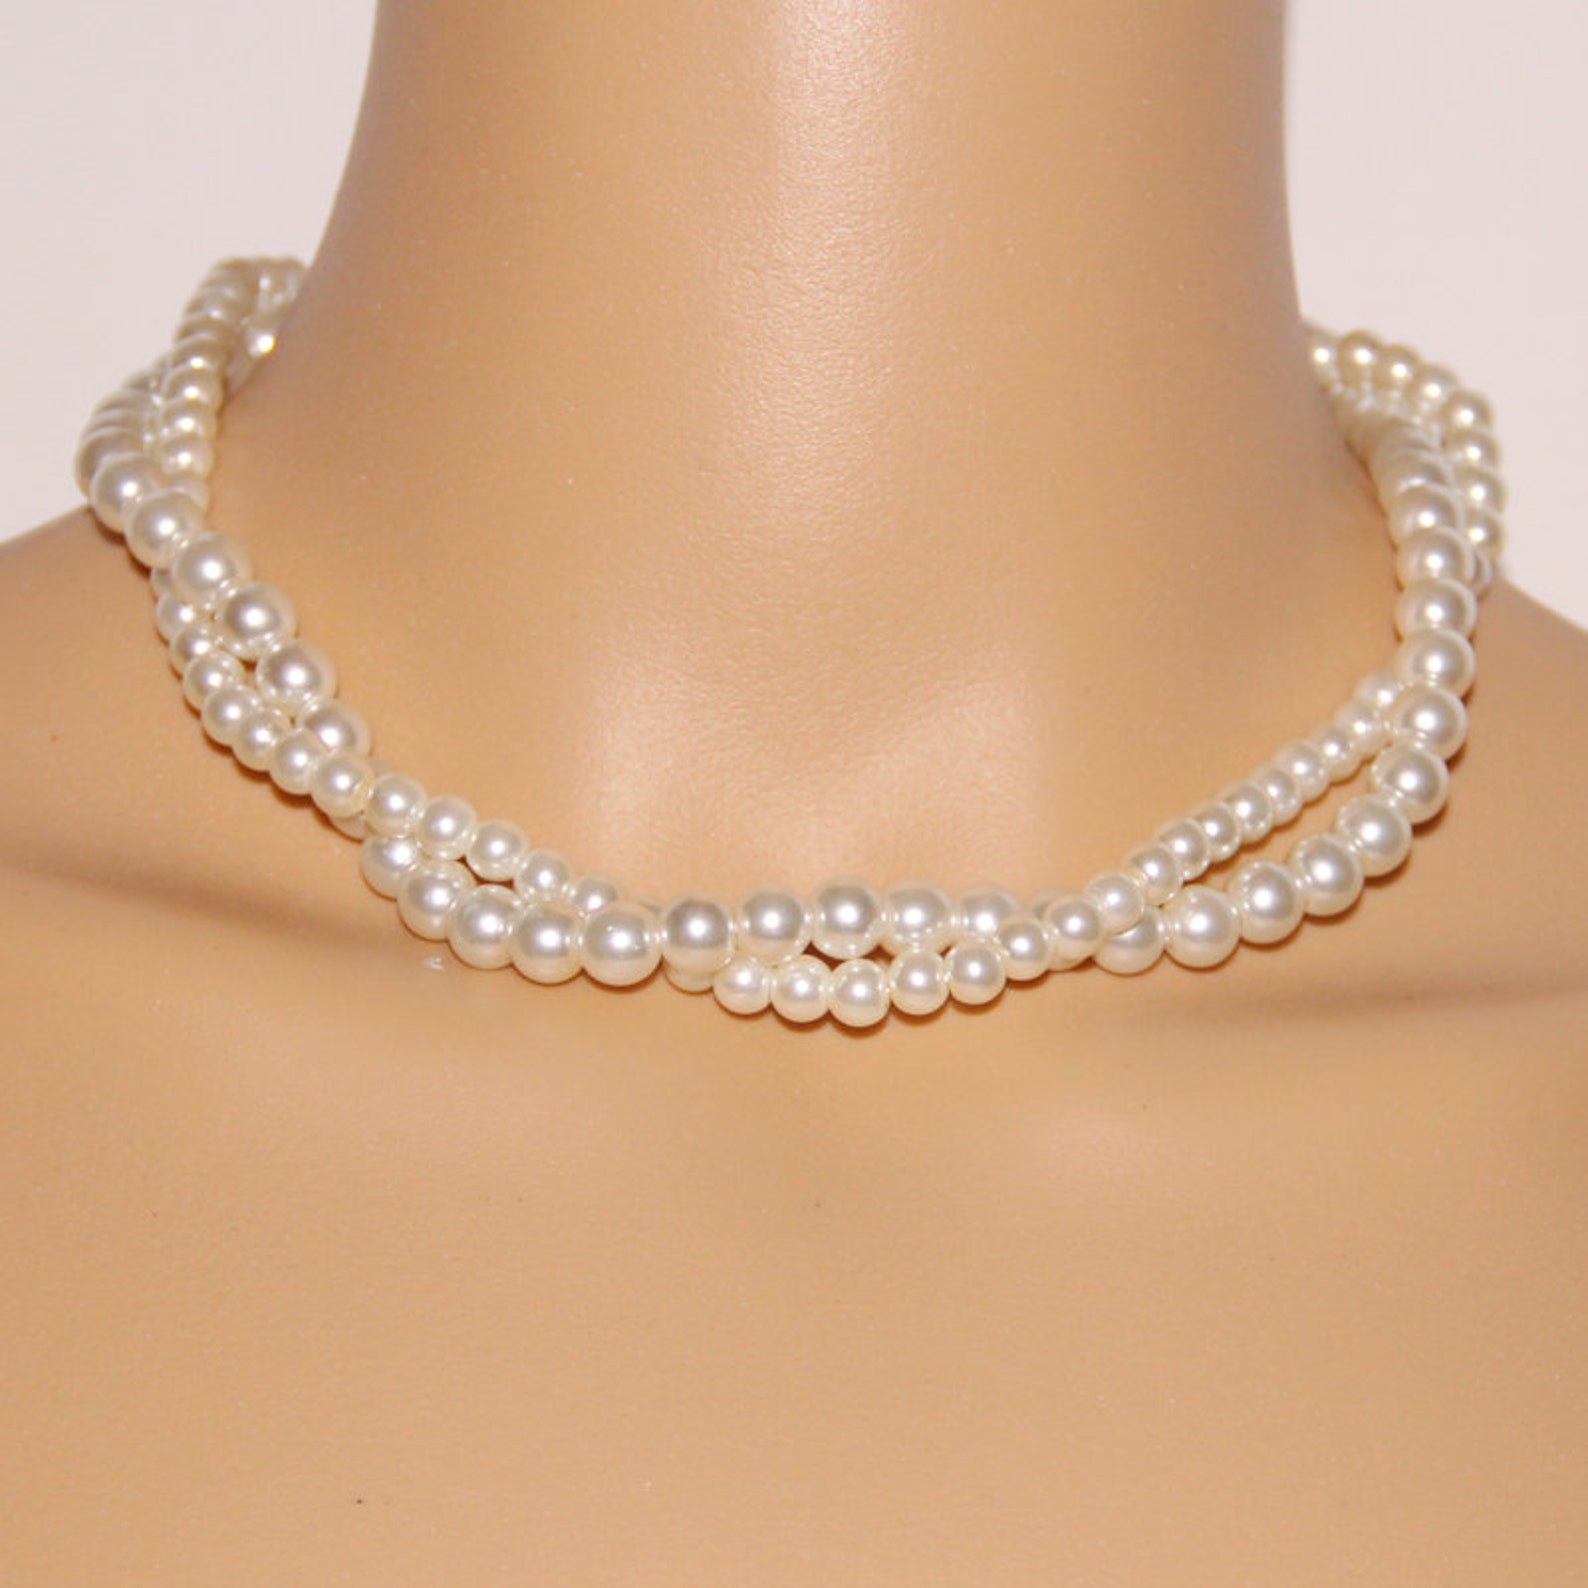 Twisted Pearl Necklacepearl Necklace Weddingpearl Necklace Etsy